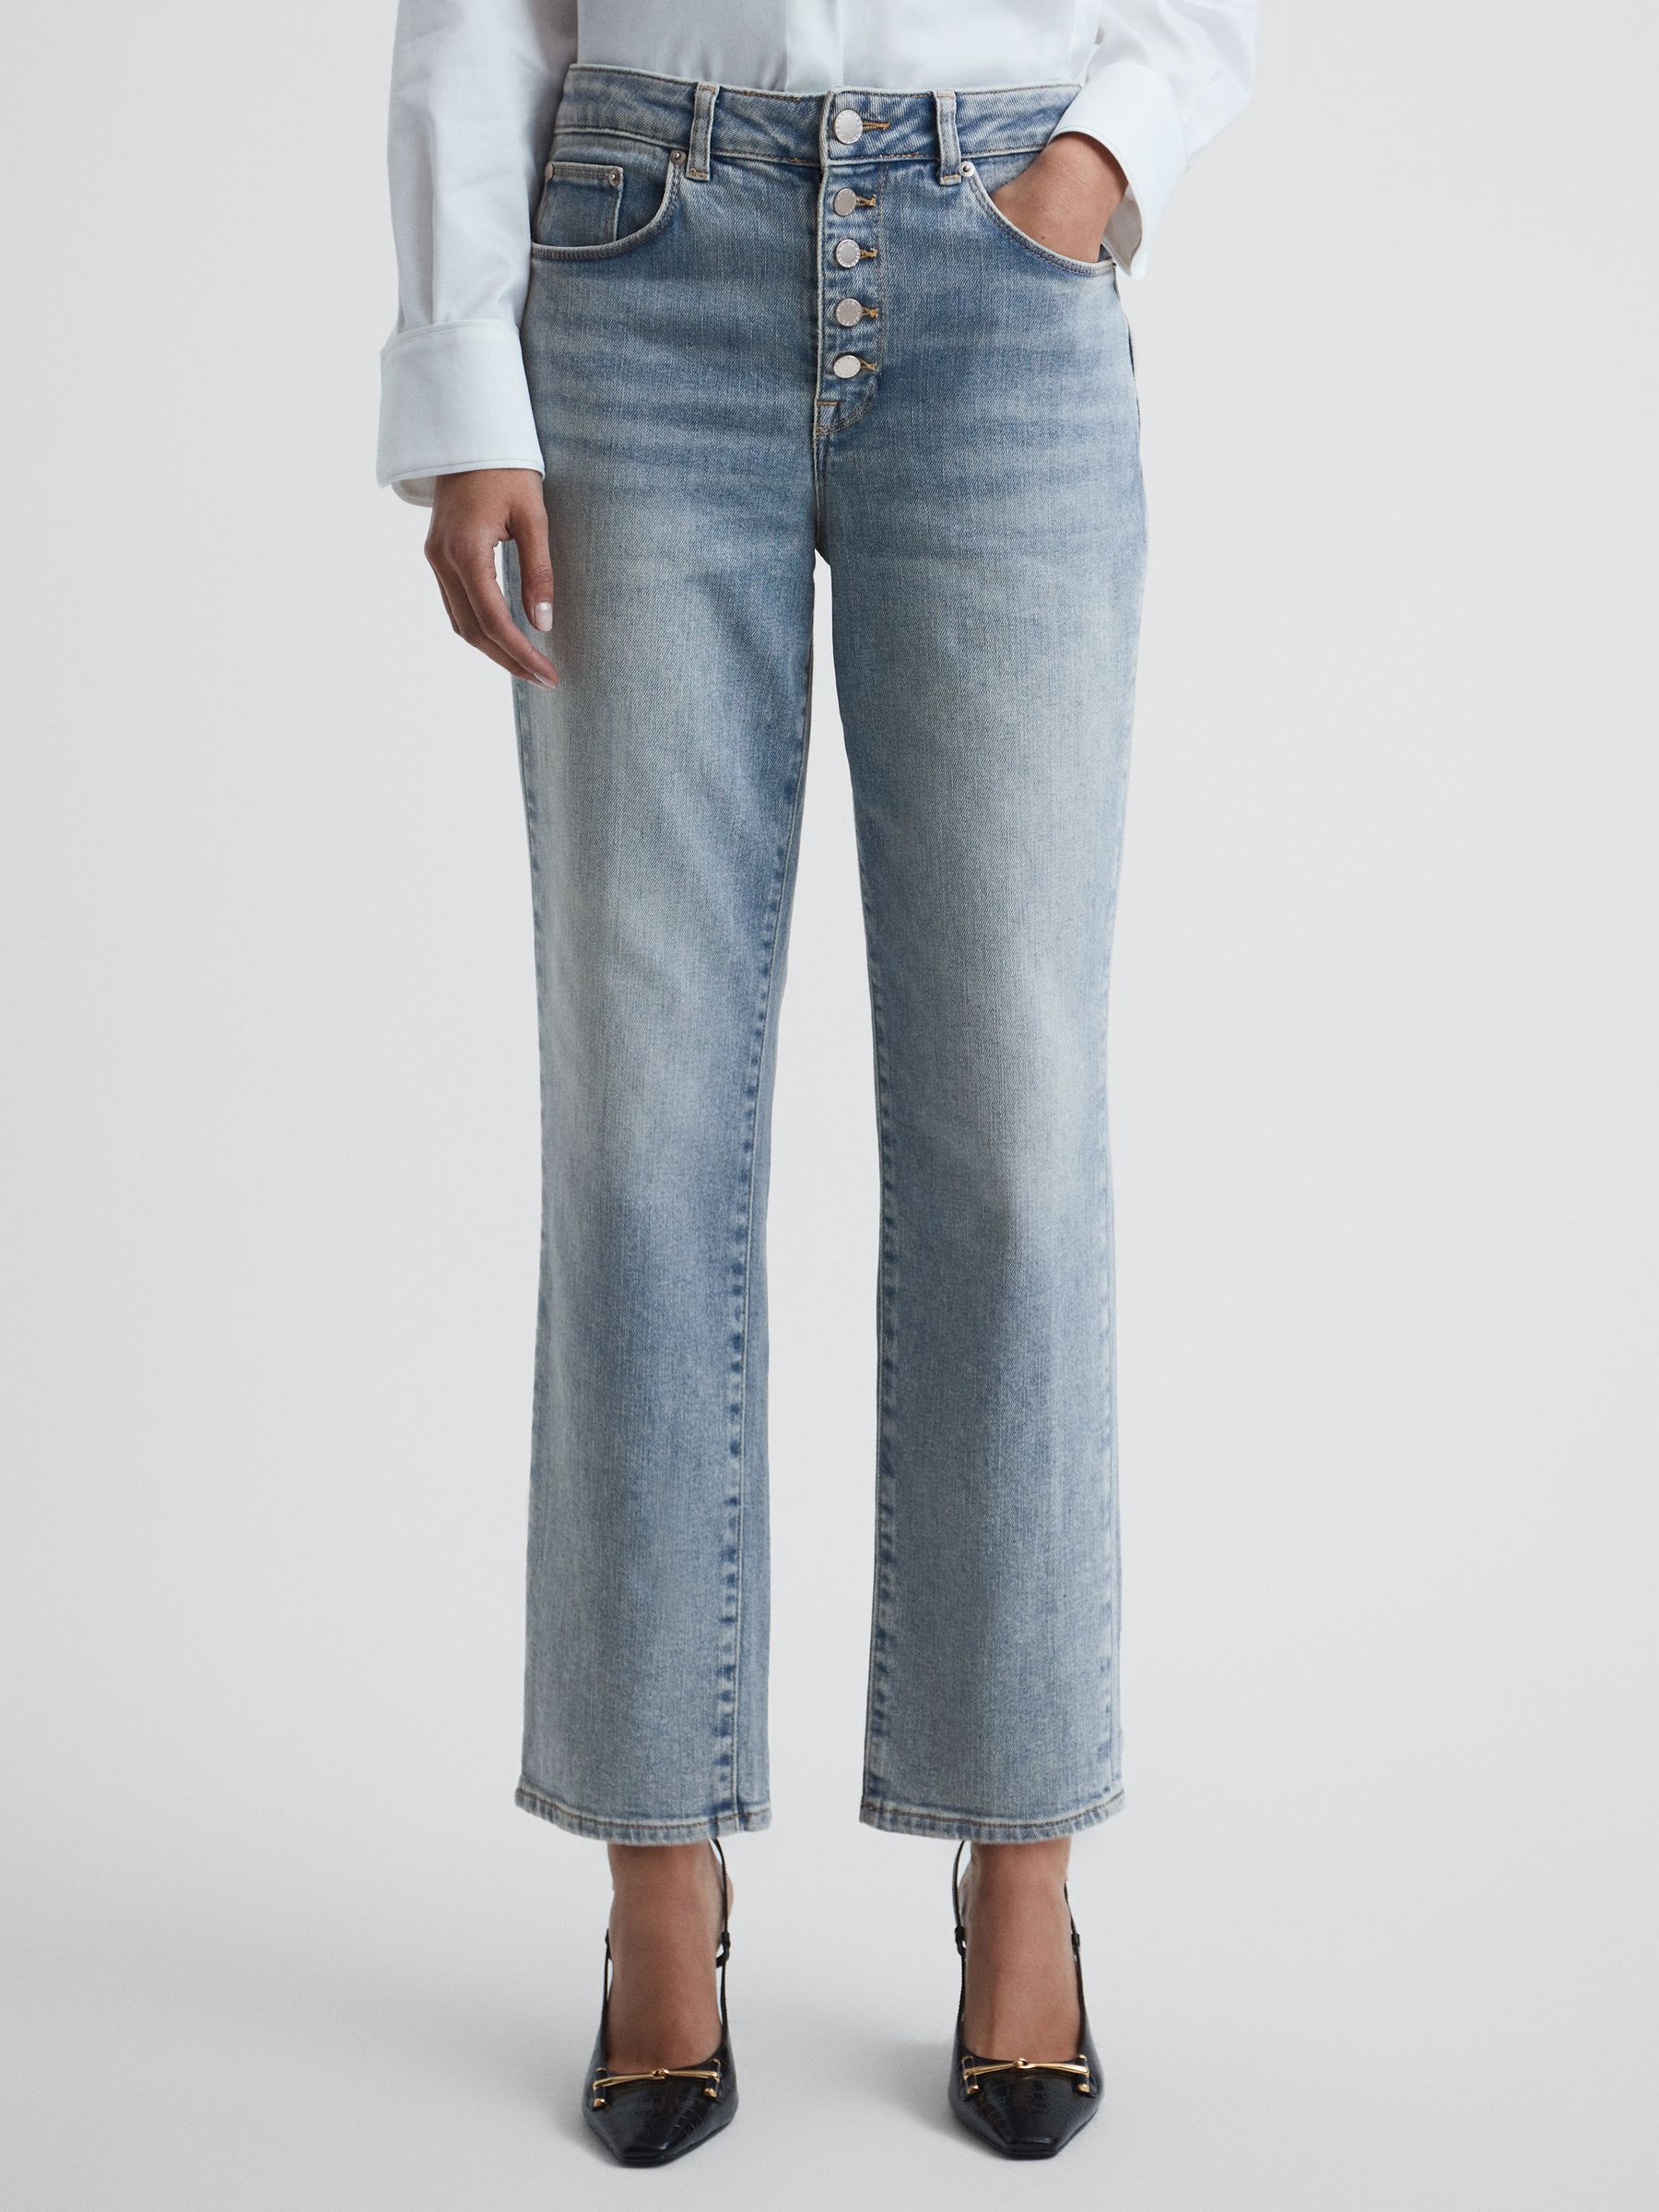 Reiss Maisie Cropped Mid Rise Straight Leg Jeans - REISS